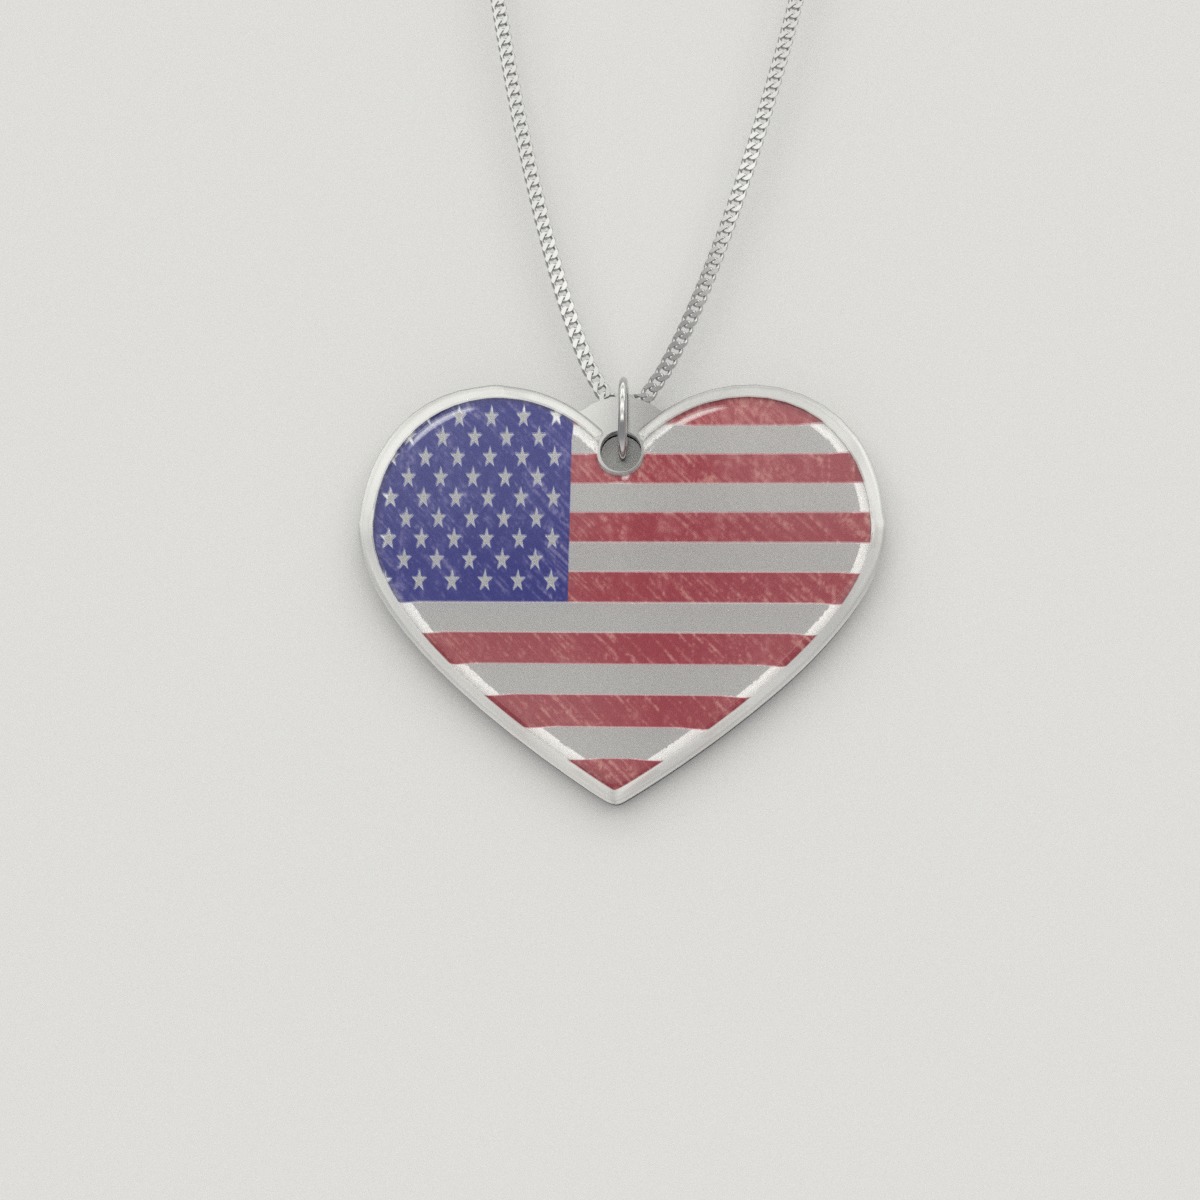 Heart of America Pendant Necklace